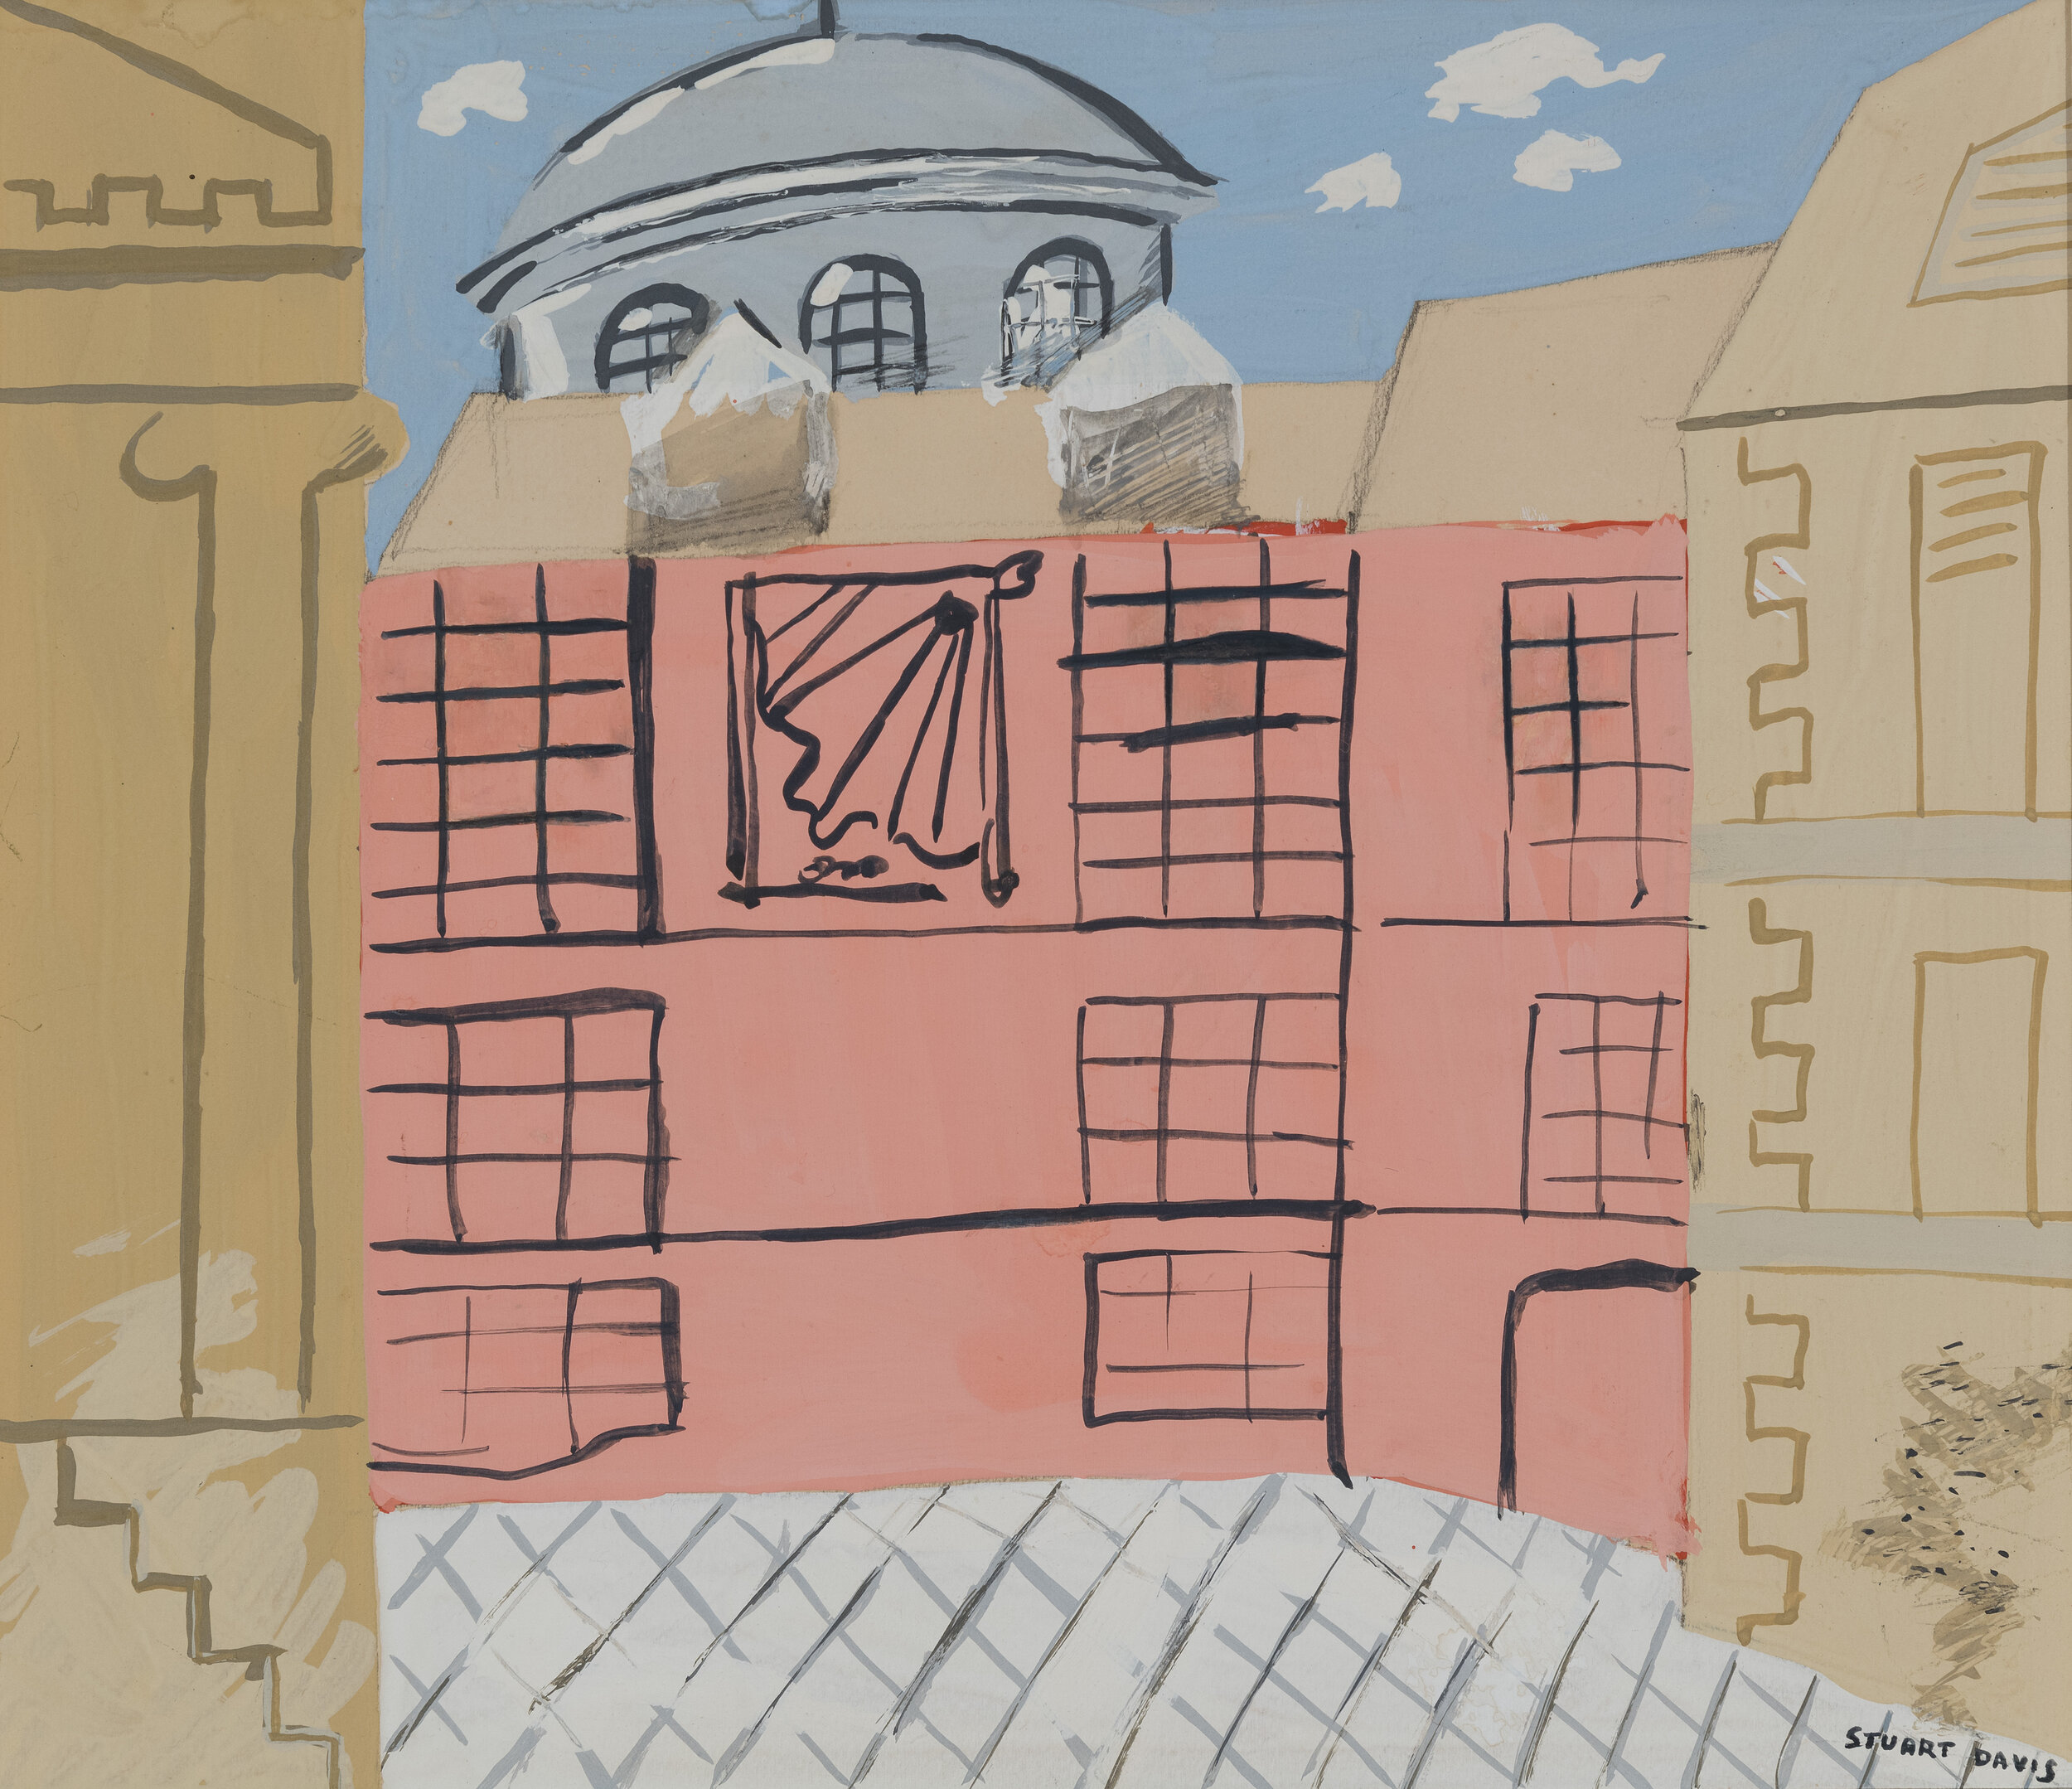 Painting of Institut de France building in pink with tans, grays, and blues